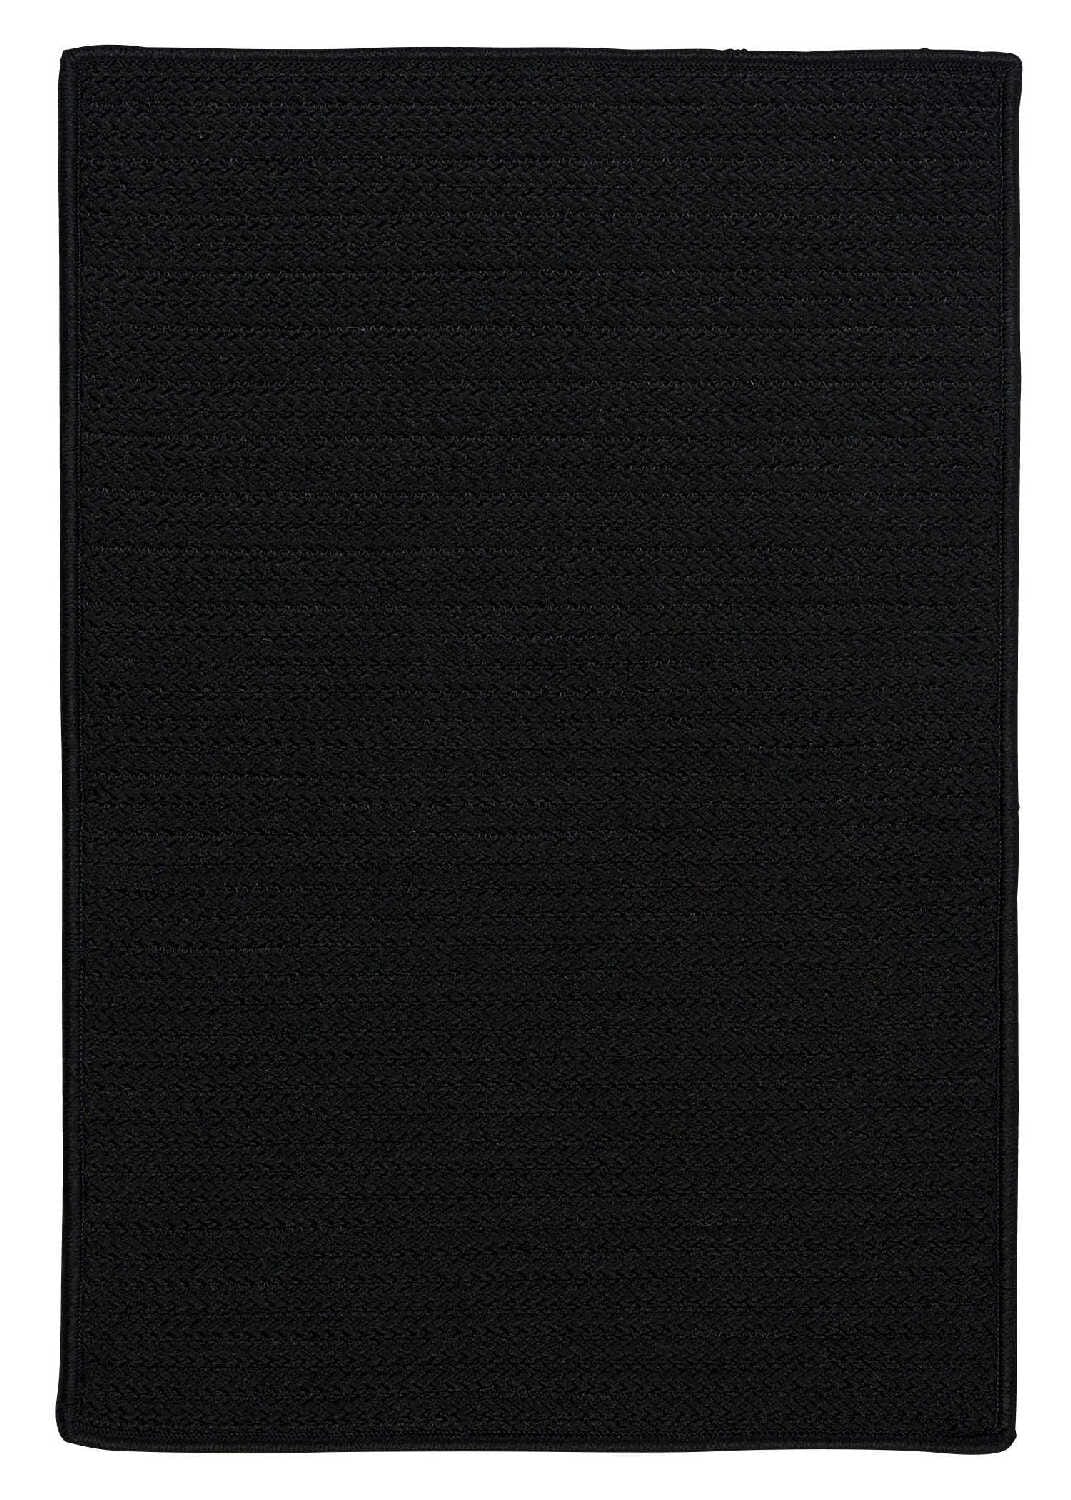 Colonial Mills Simply Home Solid H031 Black / Black Solid Color Area Rug